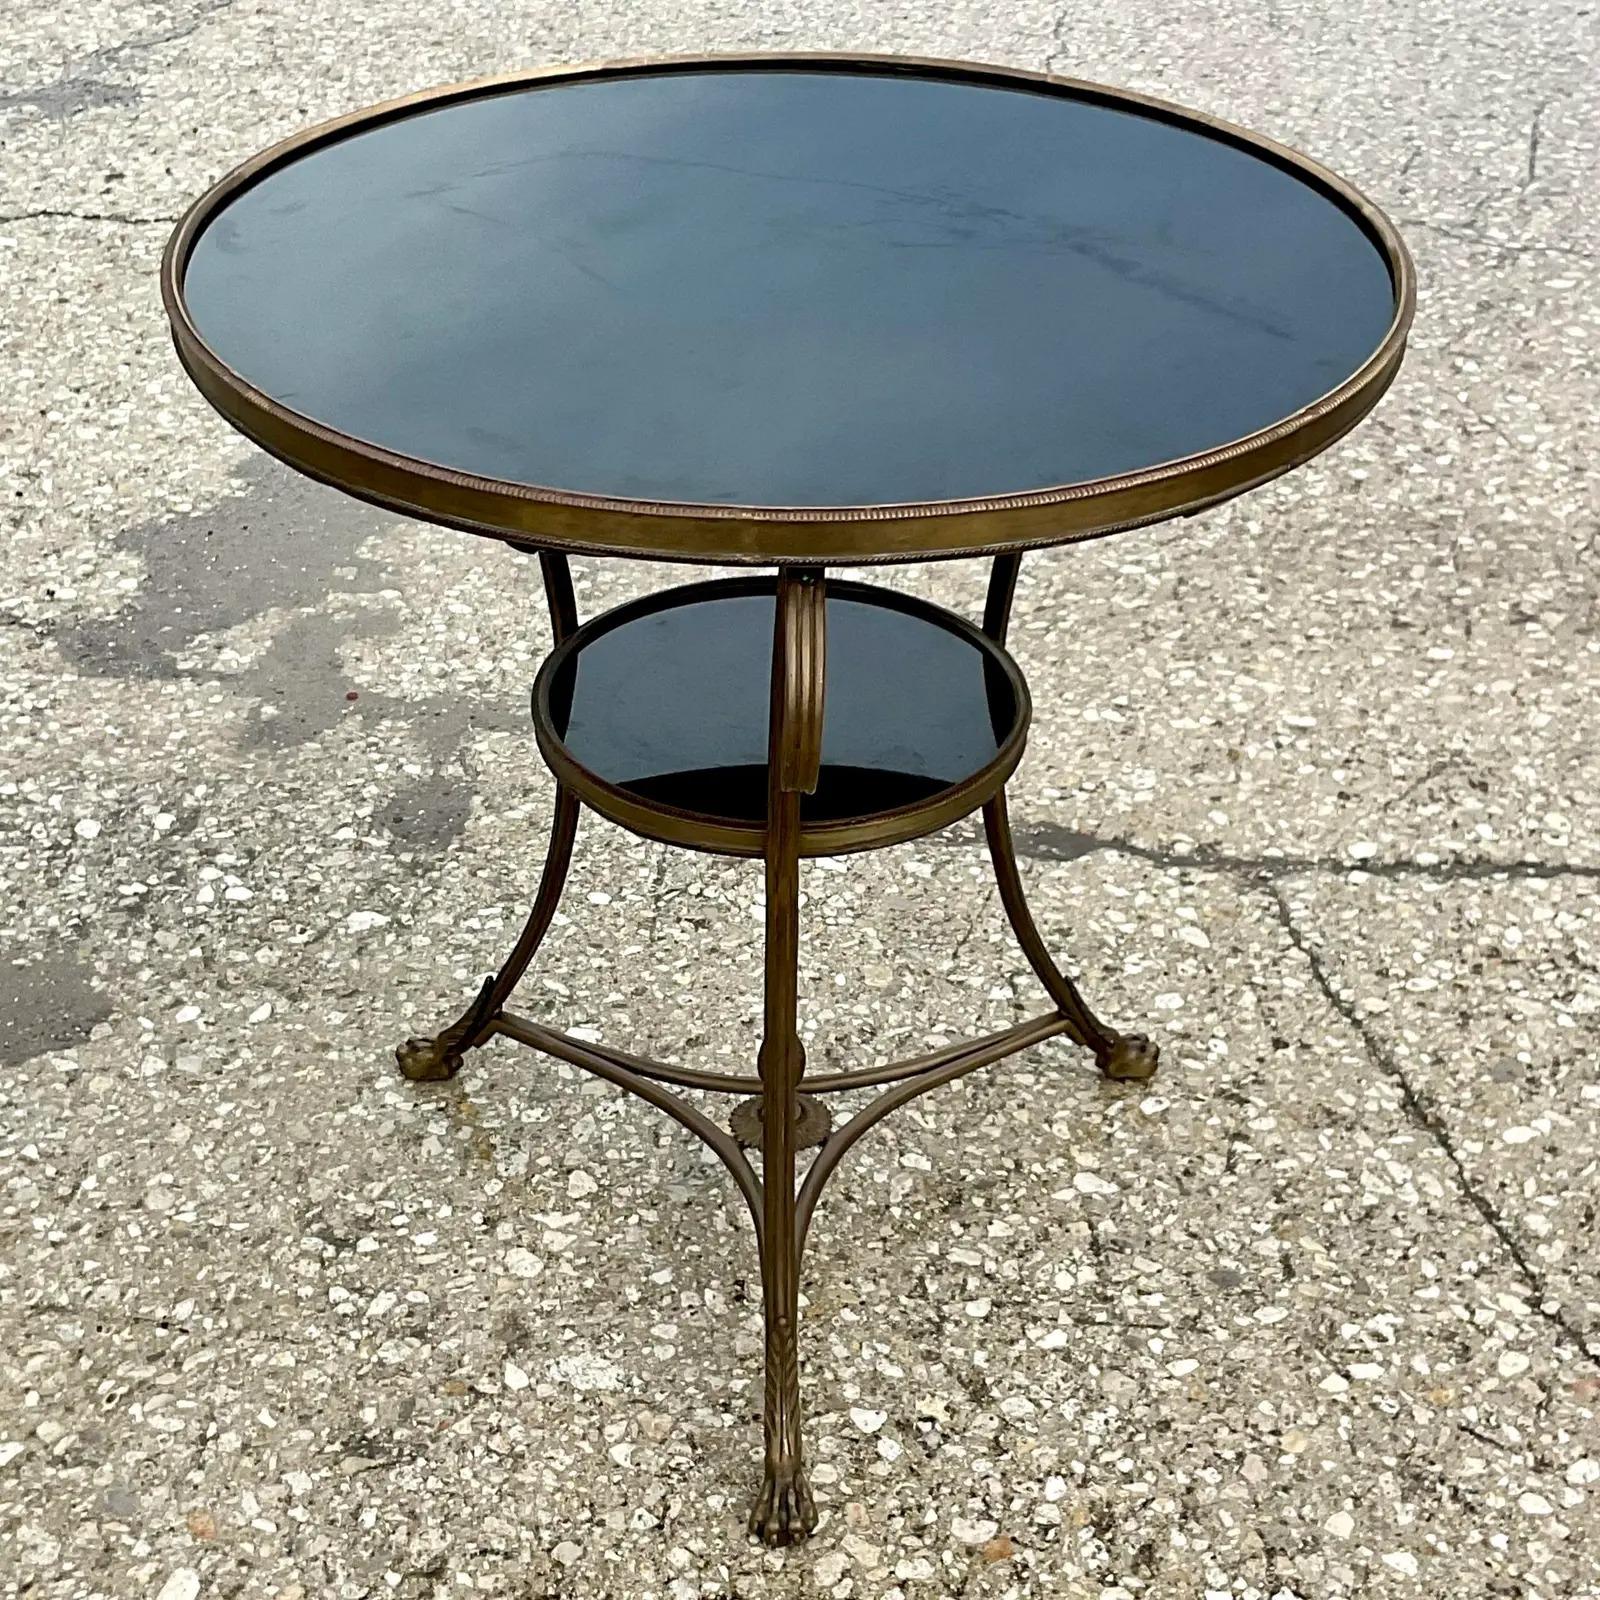 North American Vintage Regency Marble Top Gueridon Table For Sale